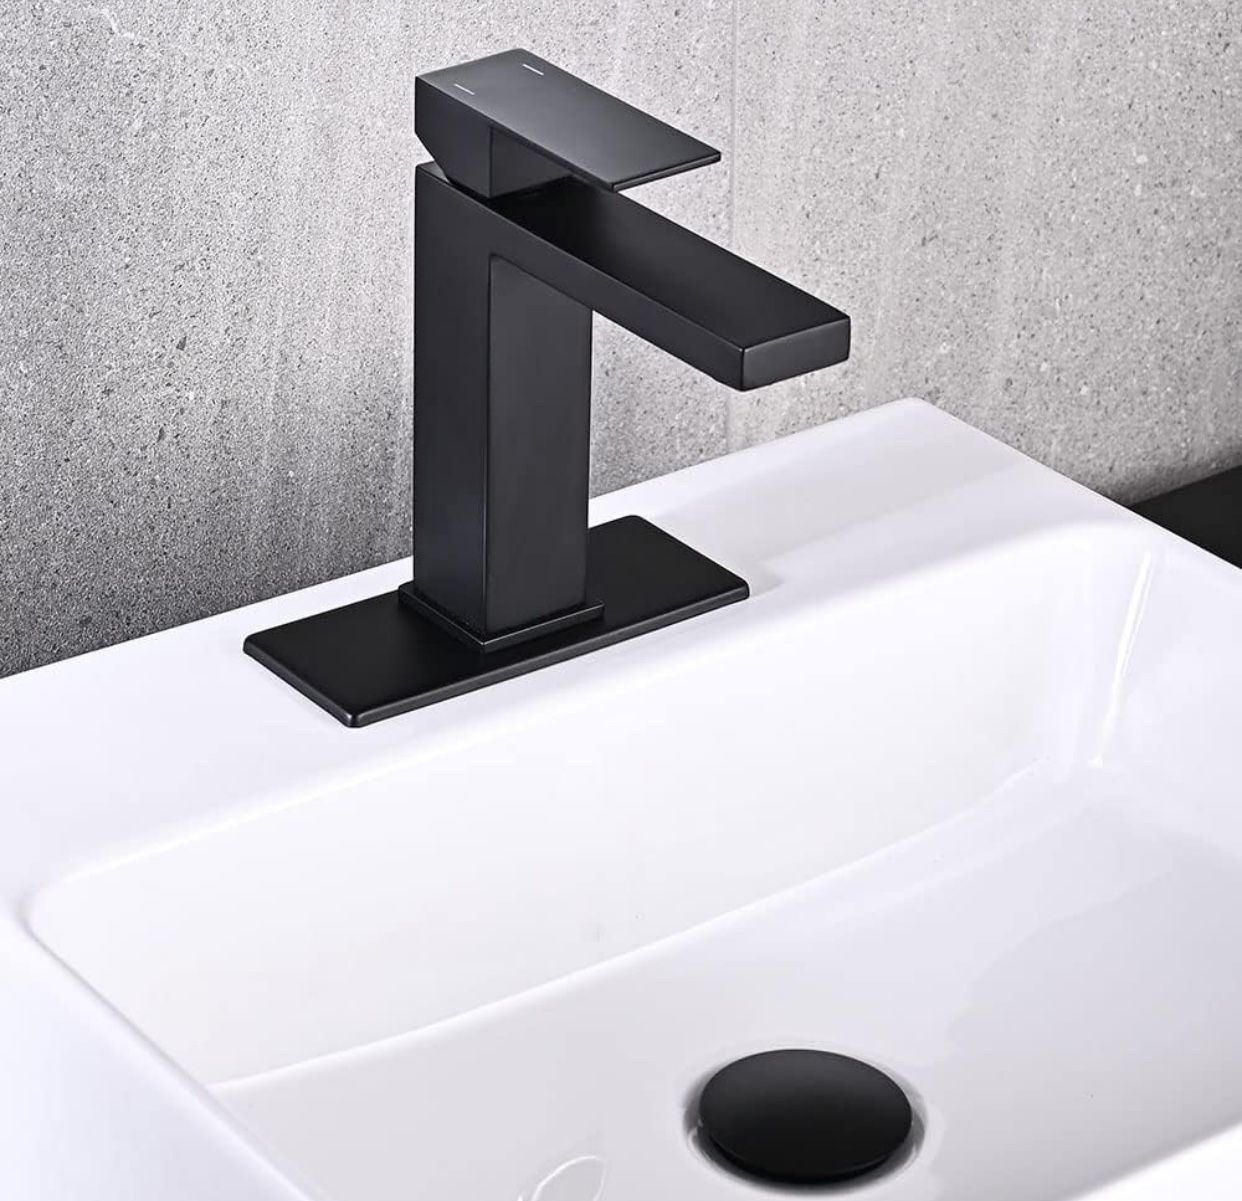 Matte Black Bathroom Faucet, Single Hole Vanity Bath Faucet, Single Handle Modern Stainless Steel Bathroom Faucets for Sink 1 Hole with Pop Up Drain S